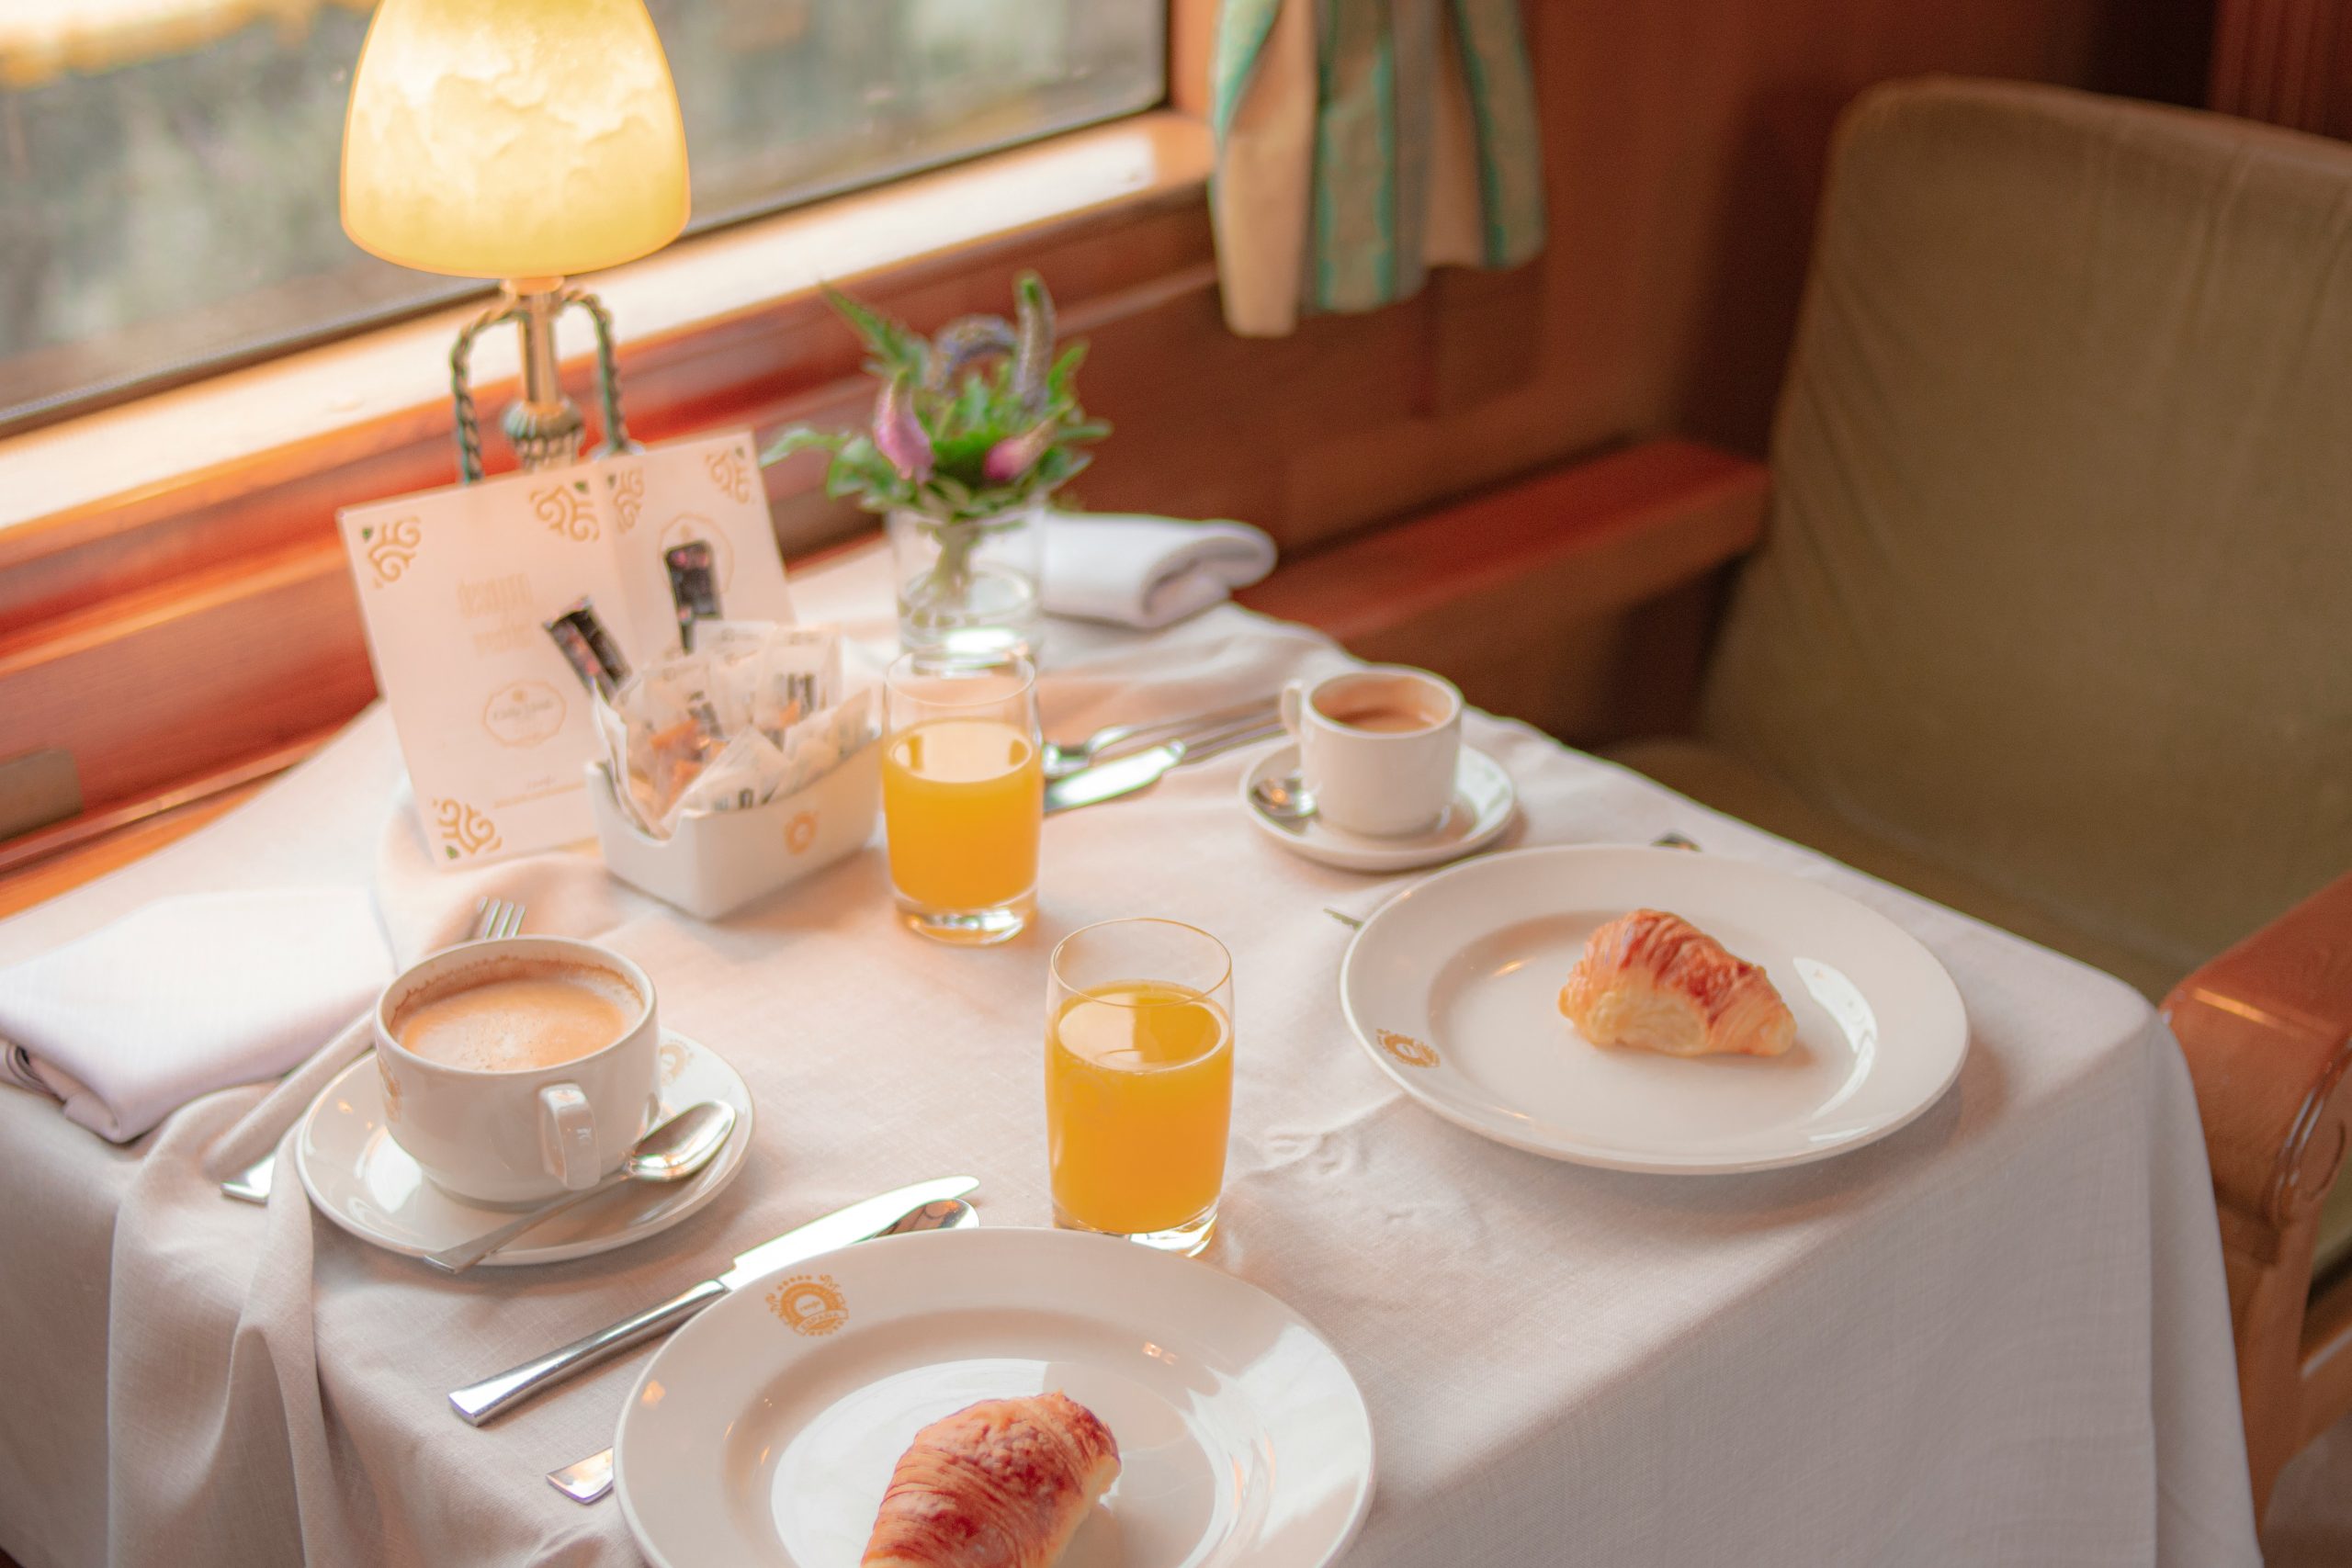 explore the world in style and comfort with our luxury train journeys. experience exquisite dining, opulent cabins, and breathtaking views on our meticulously curated train routes.